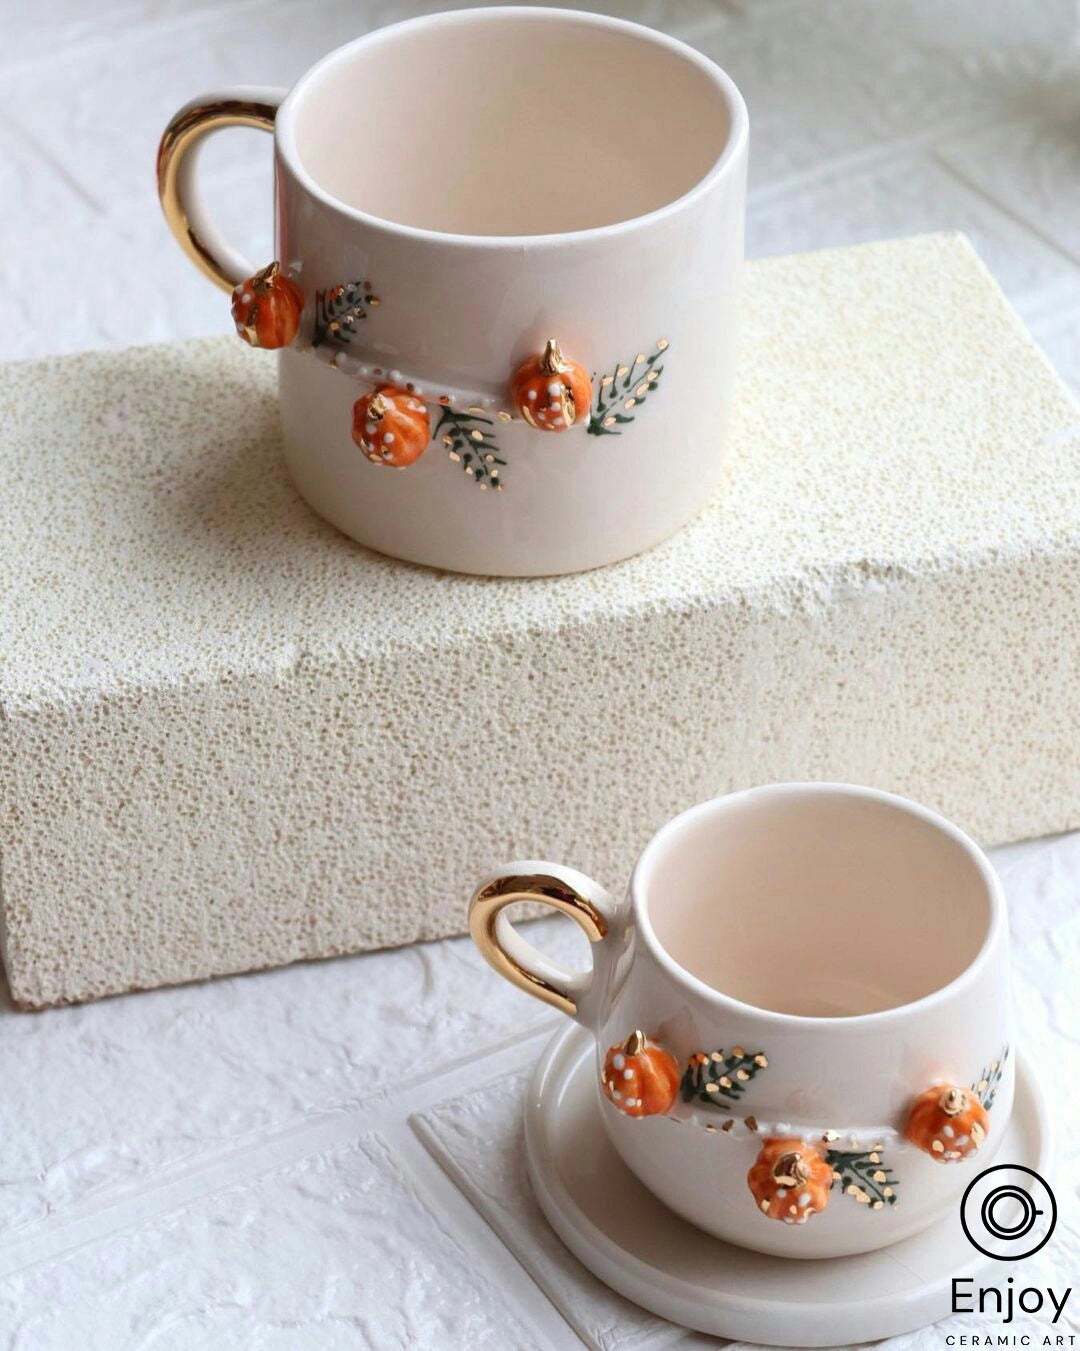 Two handcrafted ceramic mugs with golden handles and autumn-themed pumpkin designs, set on a creamy textured surface for an elegant, seasonal display.